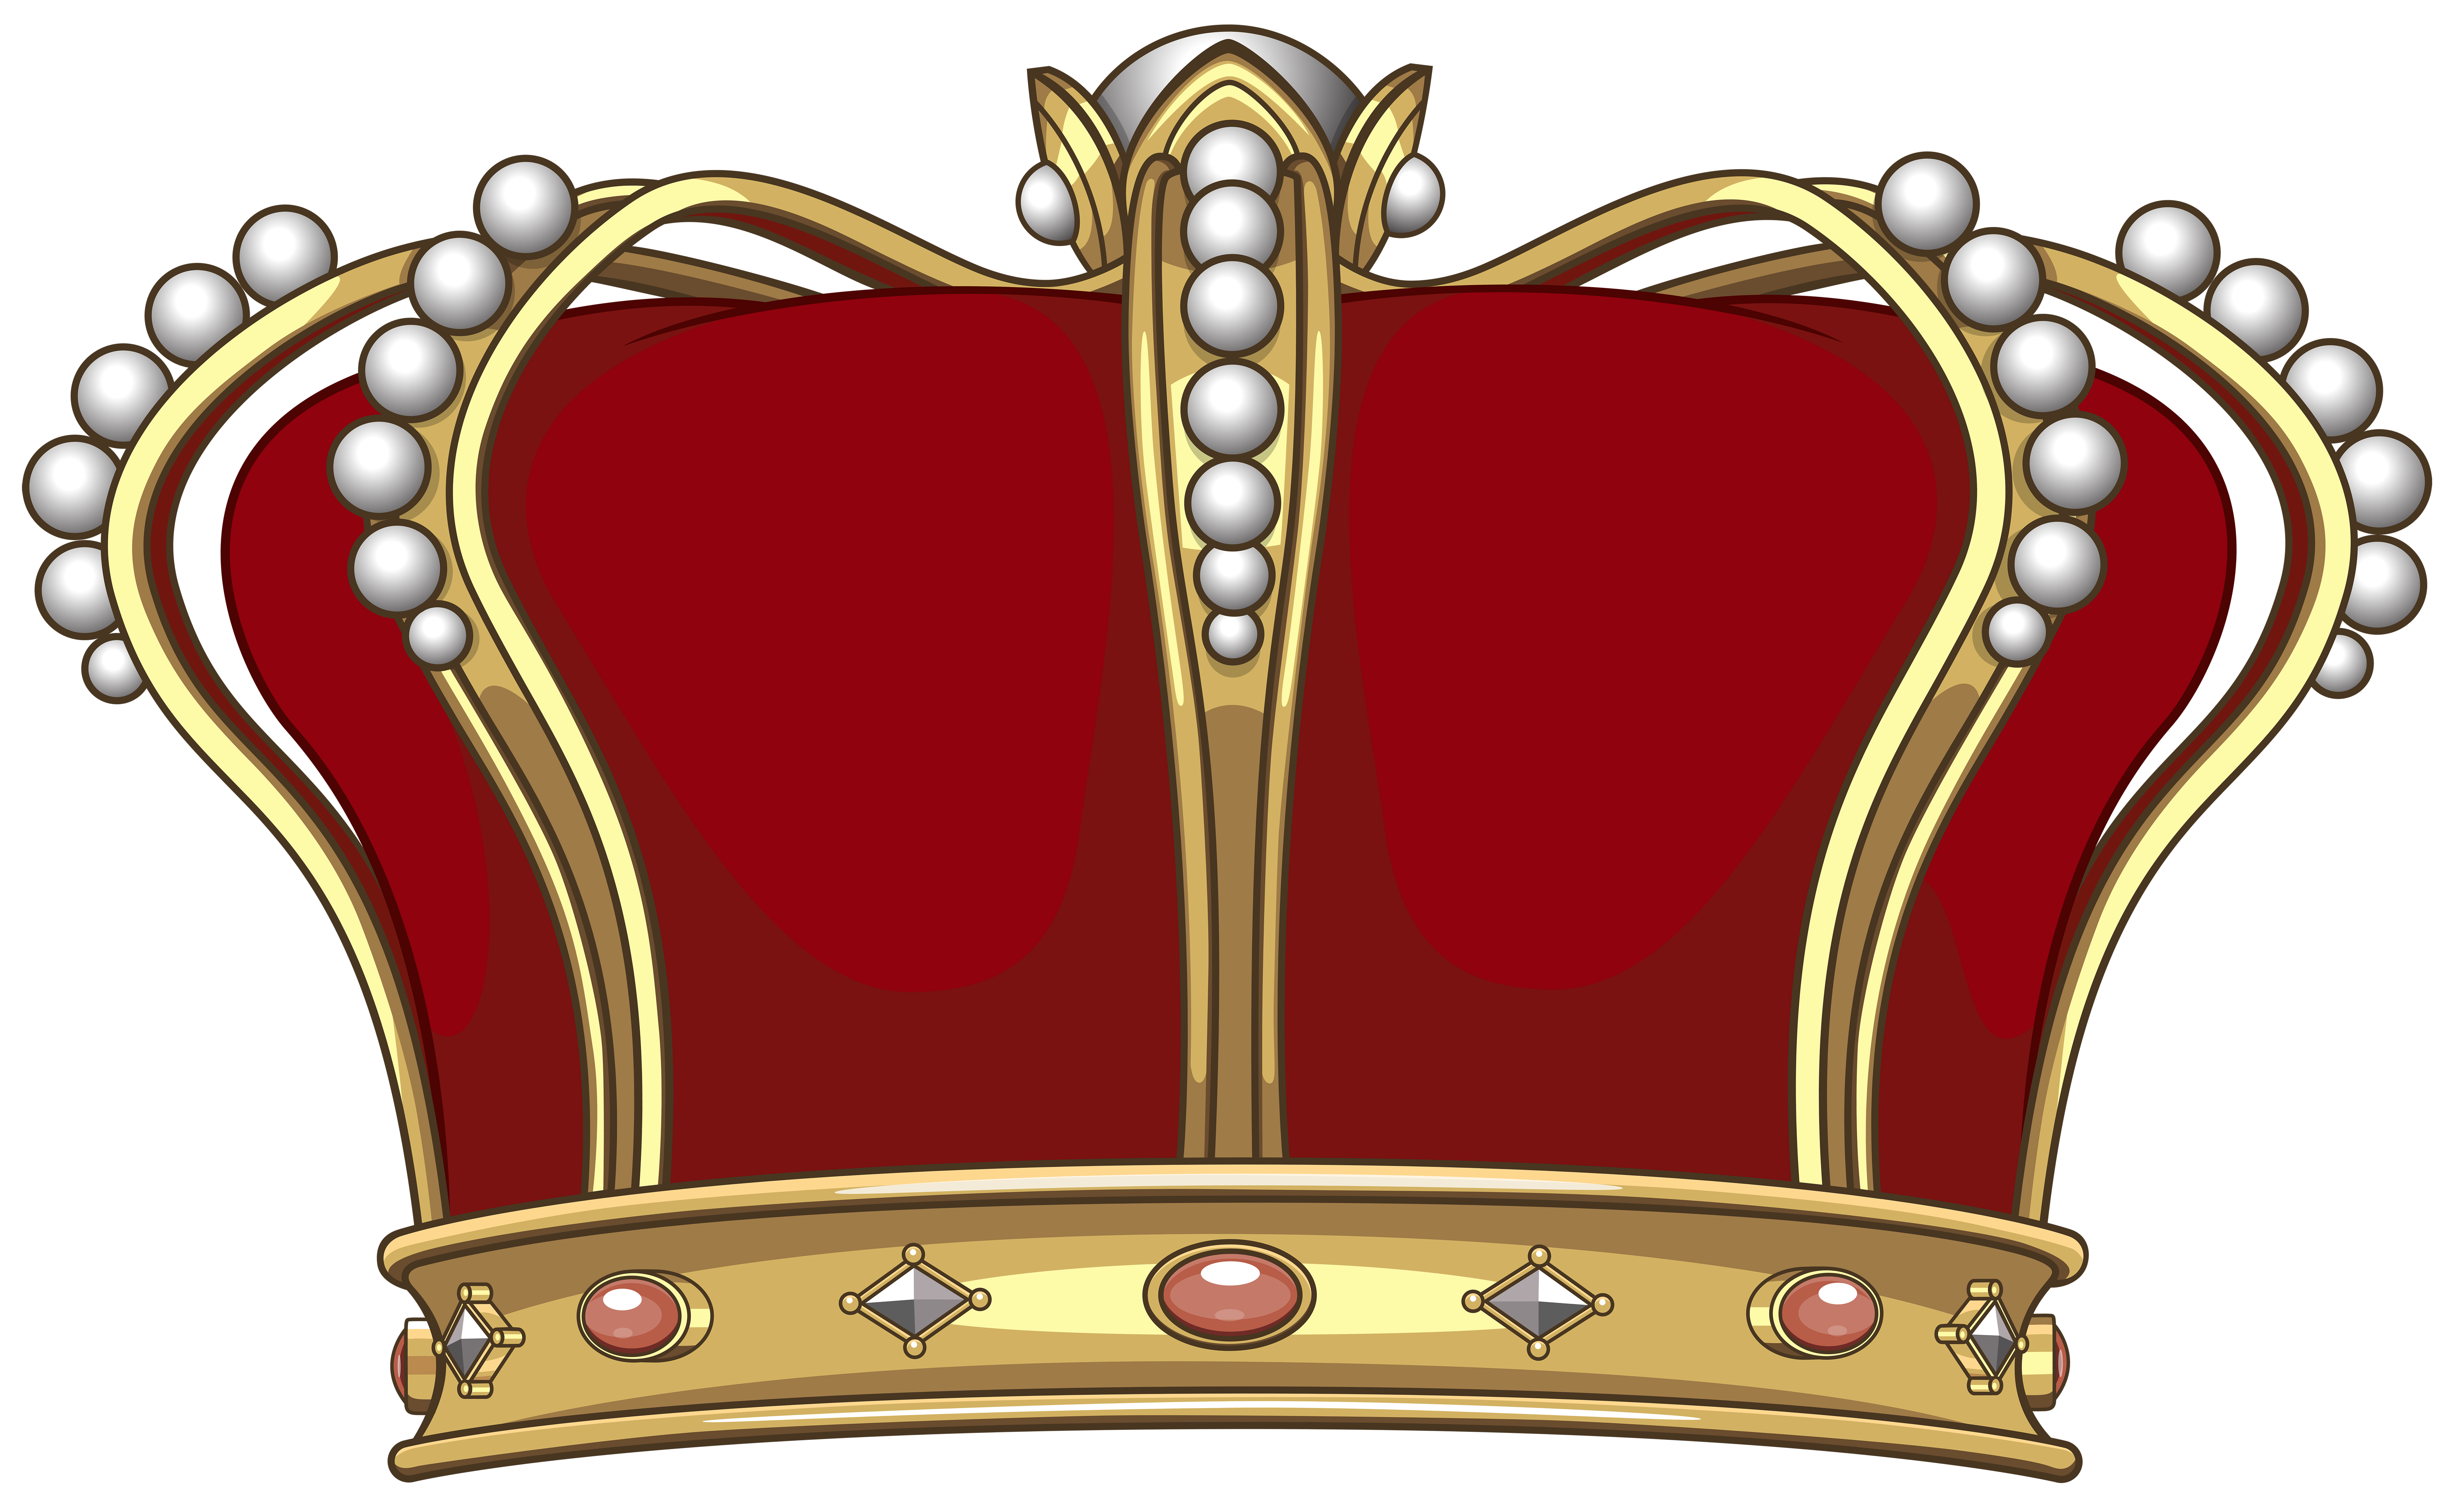 Collection of Kings Crown PNG HD. | PlusPNG